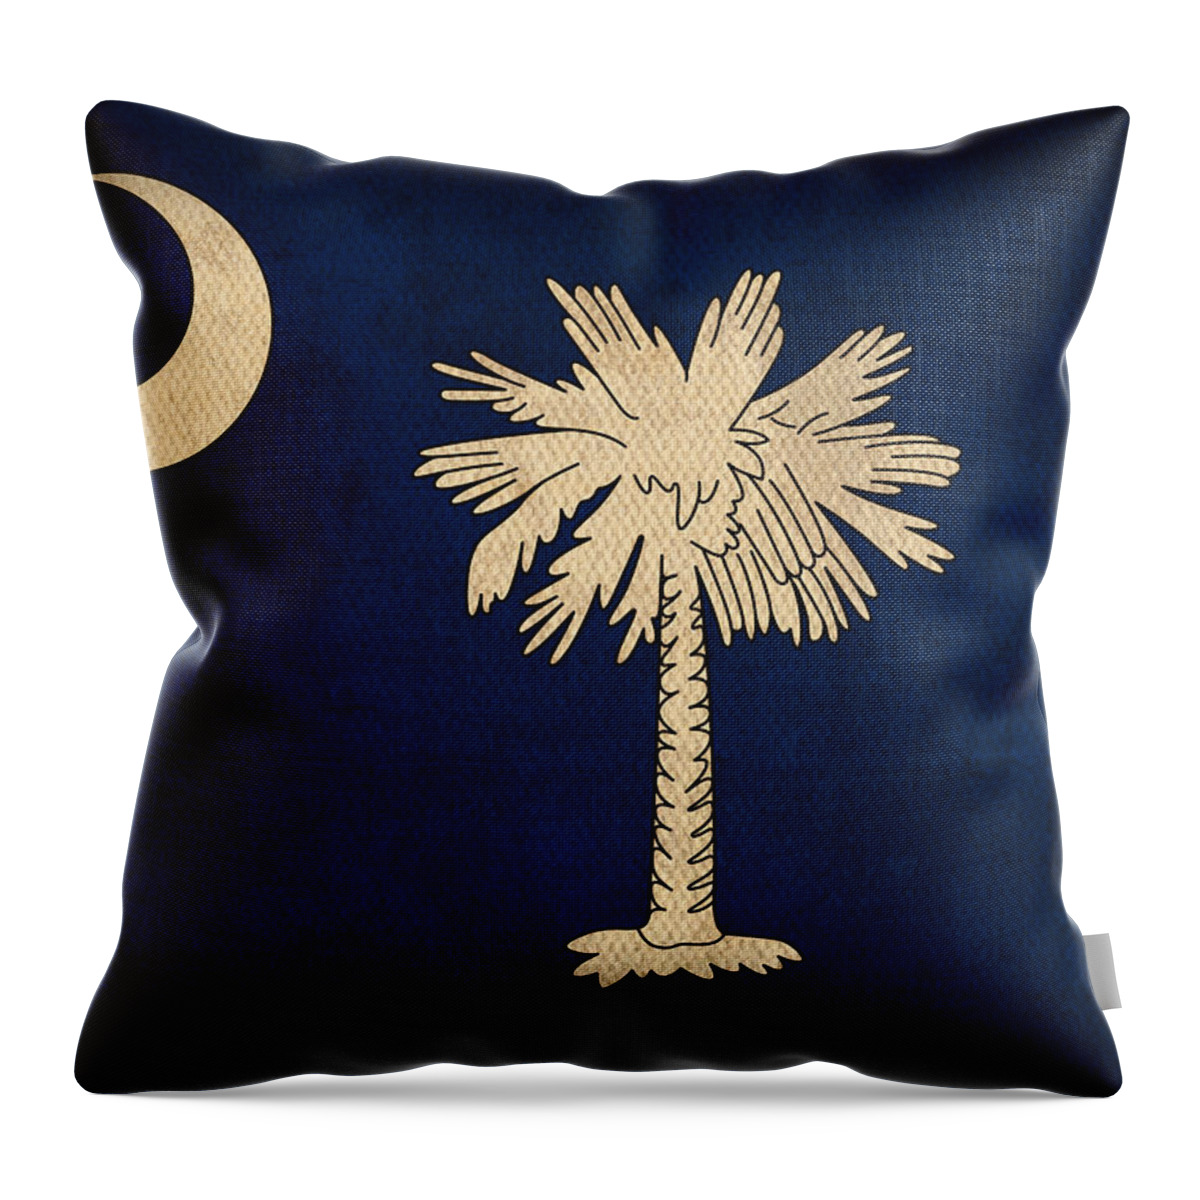 South Throw Pillow featuring the mixed media South Carolina State Flag Art on Worn Canvas by Design Turnpike